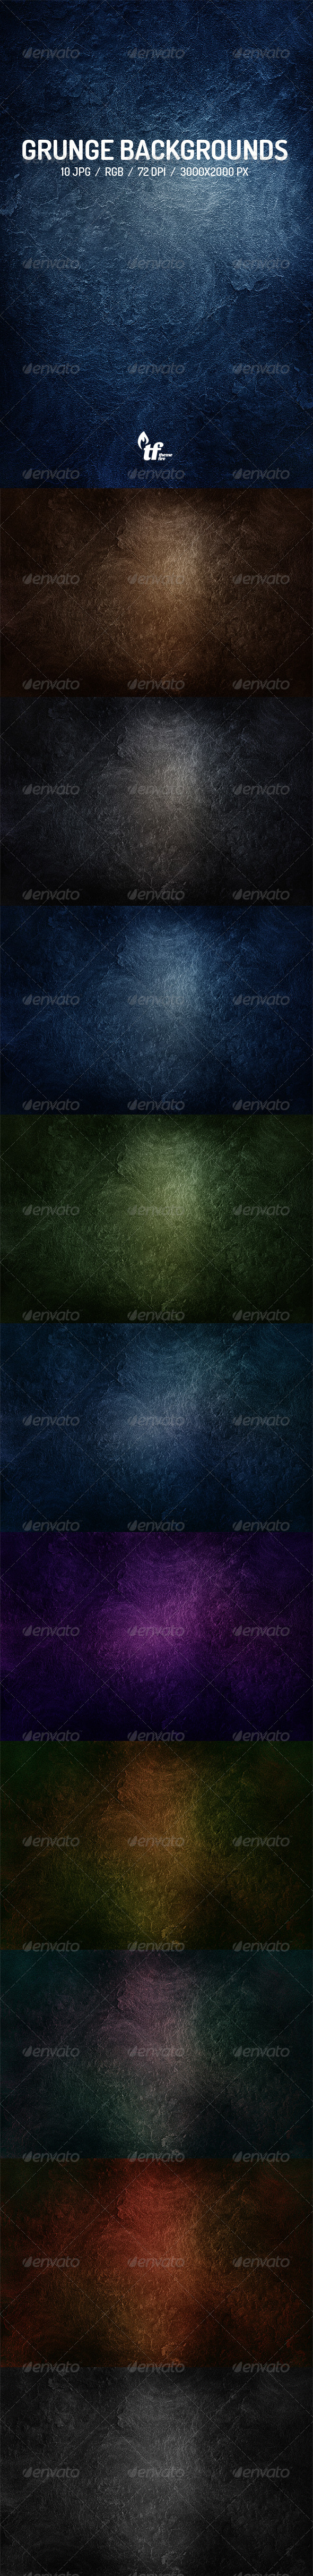 GraphicRiver Grunge Backgrounds 7692949